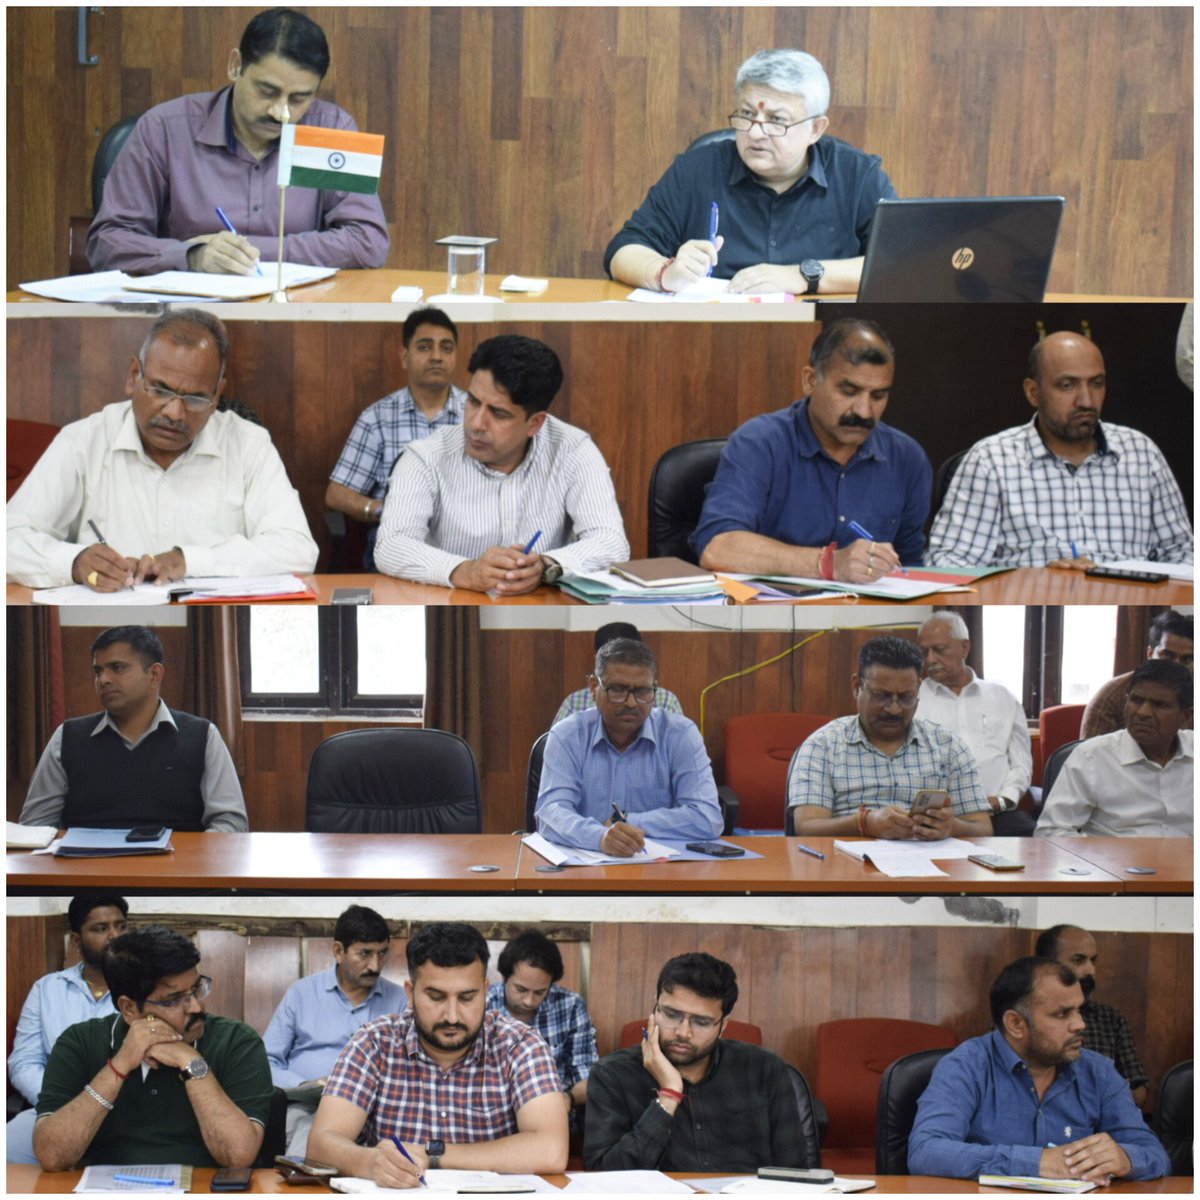 DDC Reasi,@vishesh_jk,convened a meeting to review the progress ofNH Projects in the district.Discussed key developments on DAK Expressway,Akhnoor-Poonch NH,BMG/RAM roads& Katra Reasi Ransoo Highway ensuring robust infrastructure forenhanced connectivity &growth @OfficeOfLGJandK